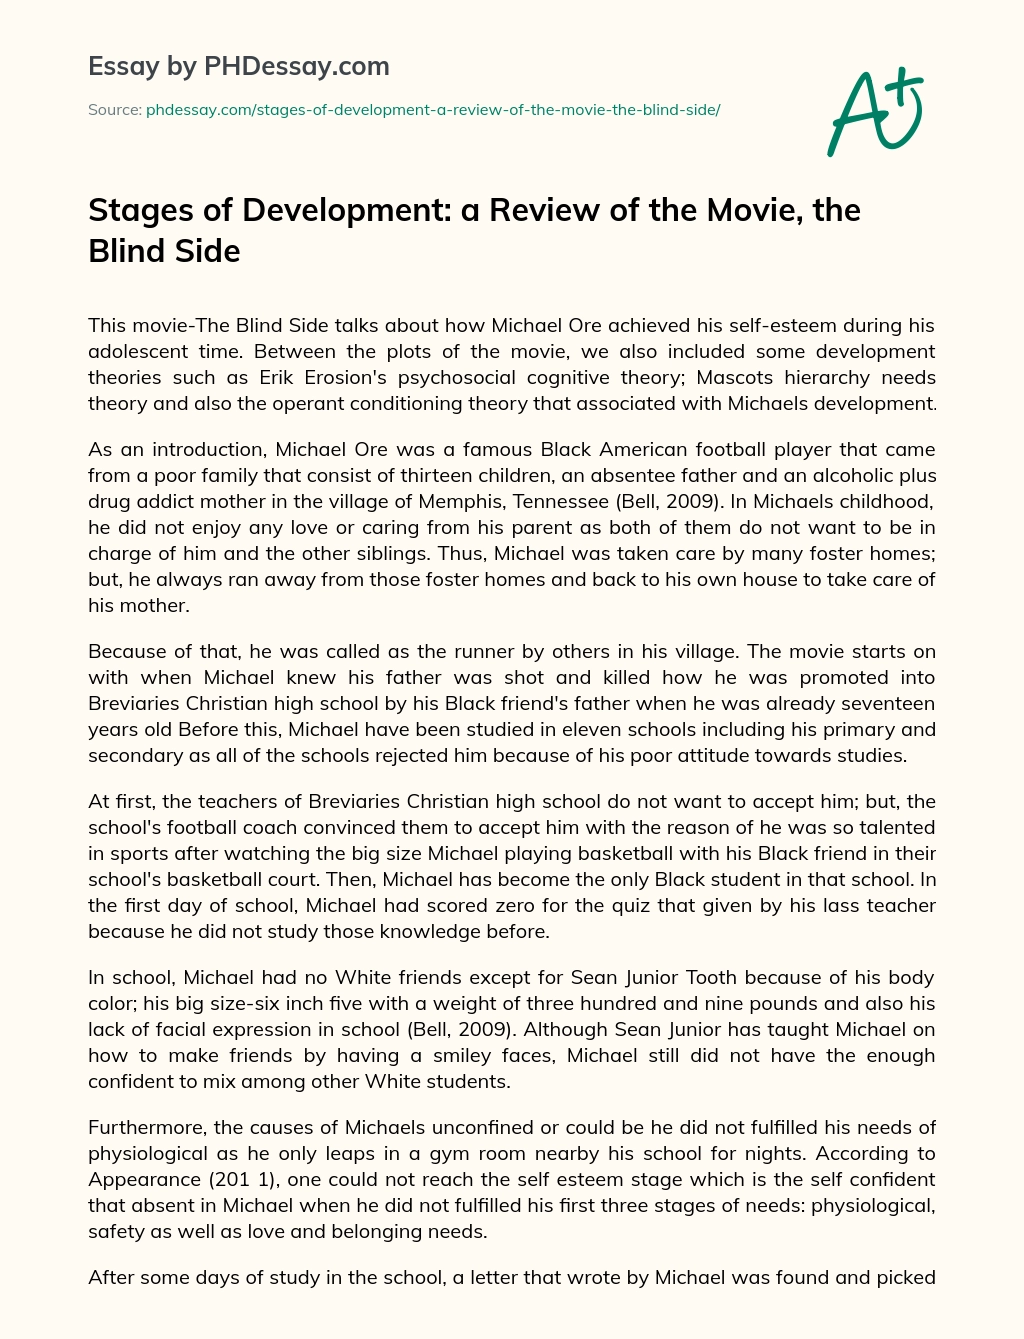 Stages of Development: a Review of the Movie, the Blind Side essay